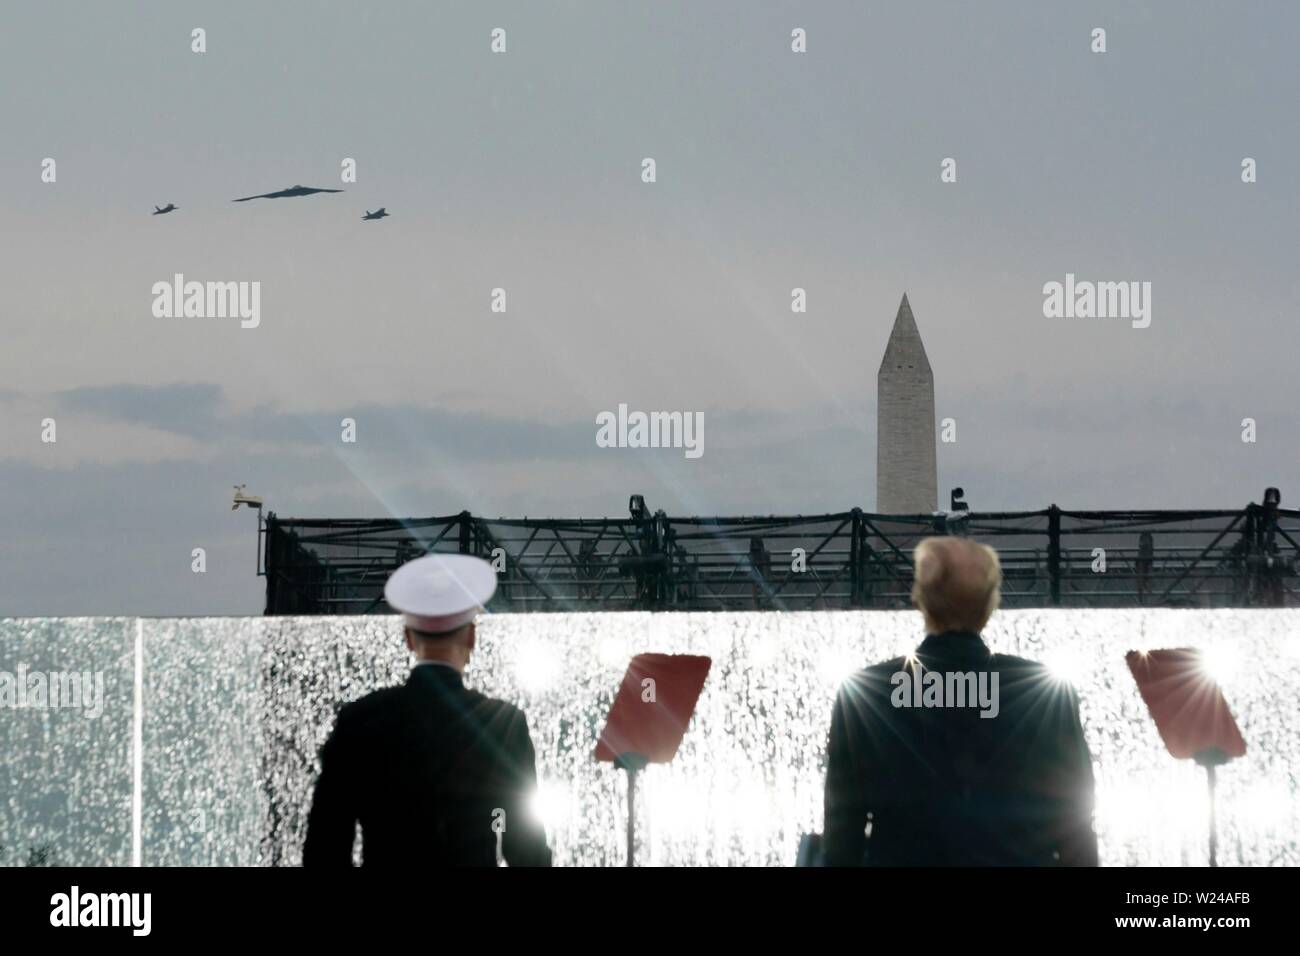 Washington DC, USA. 04th July, 2019. U.S President Donald Trump joined by the Chairman of Joint Chiefs of Staff General Joseph Dunford, left, watches an aircraft flyover at the Salute to America event at the Lincoln Memorial July 4, 2019 in Washington, D.C. Credit: Planetpix/Alamy Live News Stock Photo